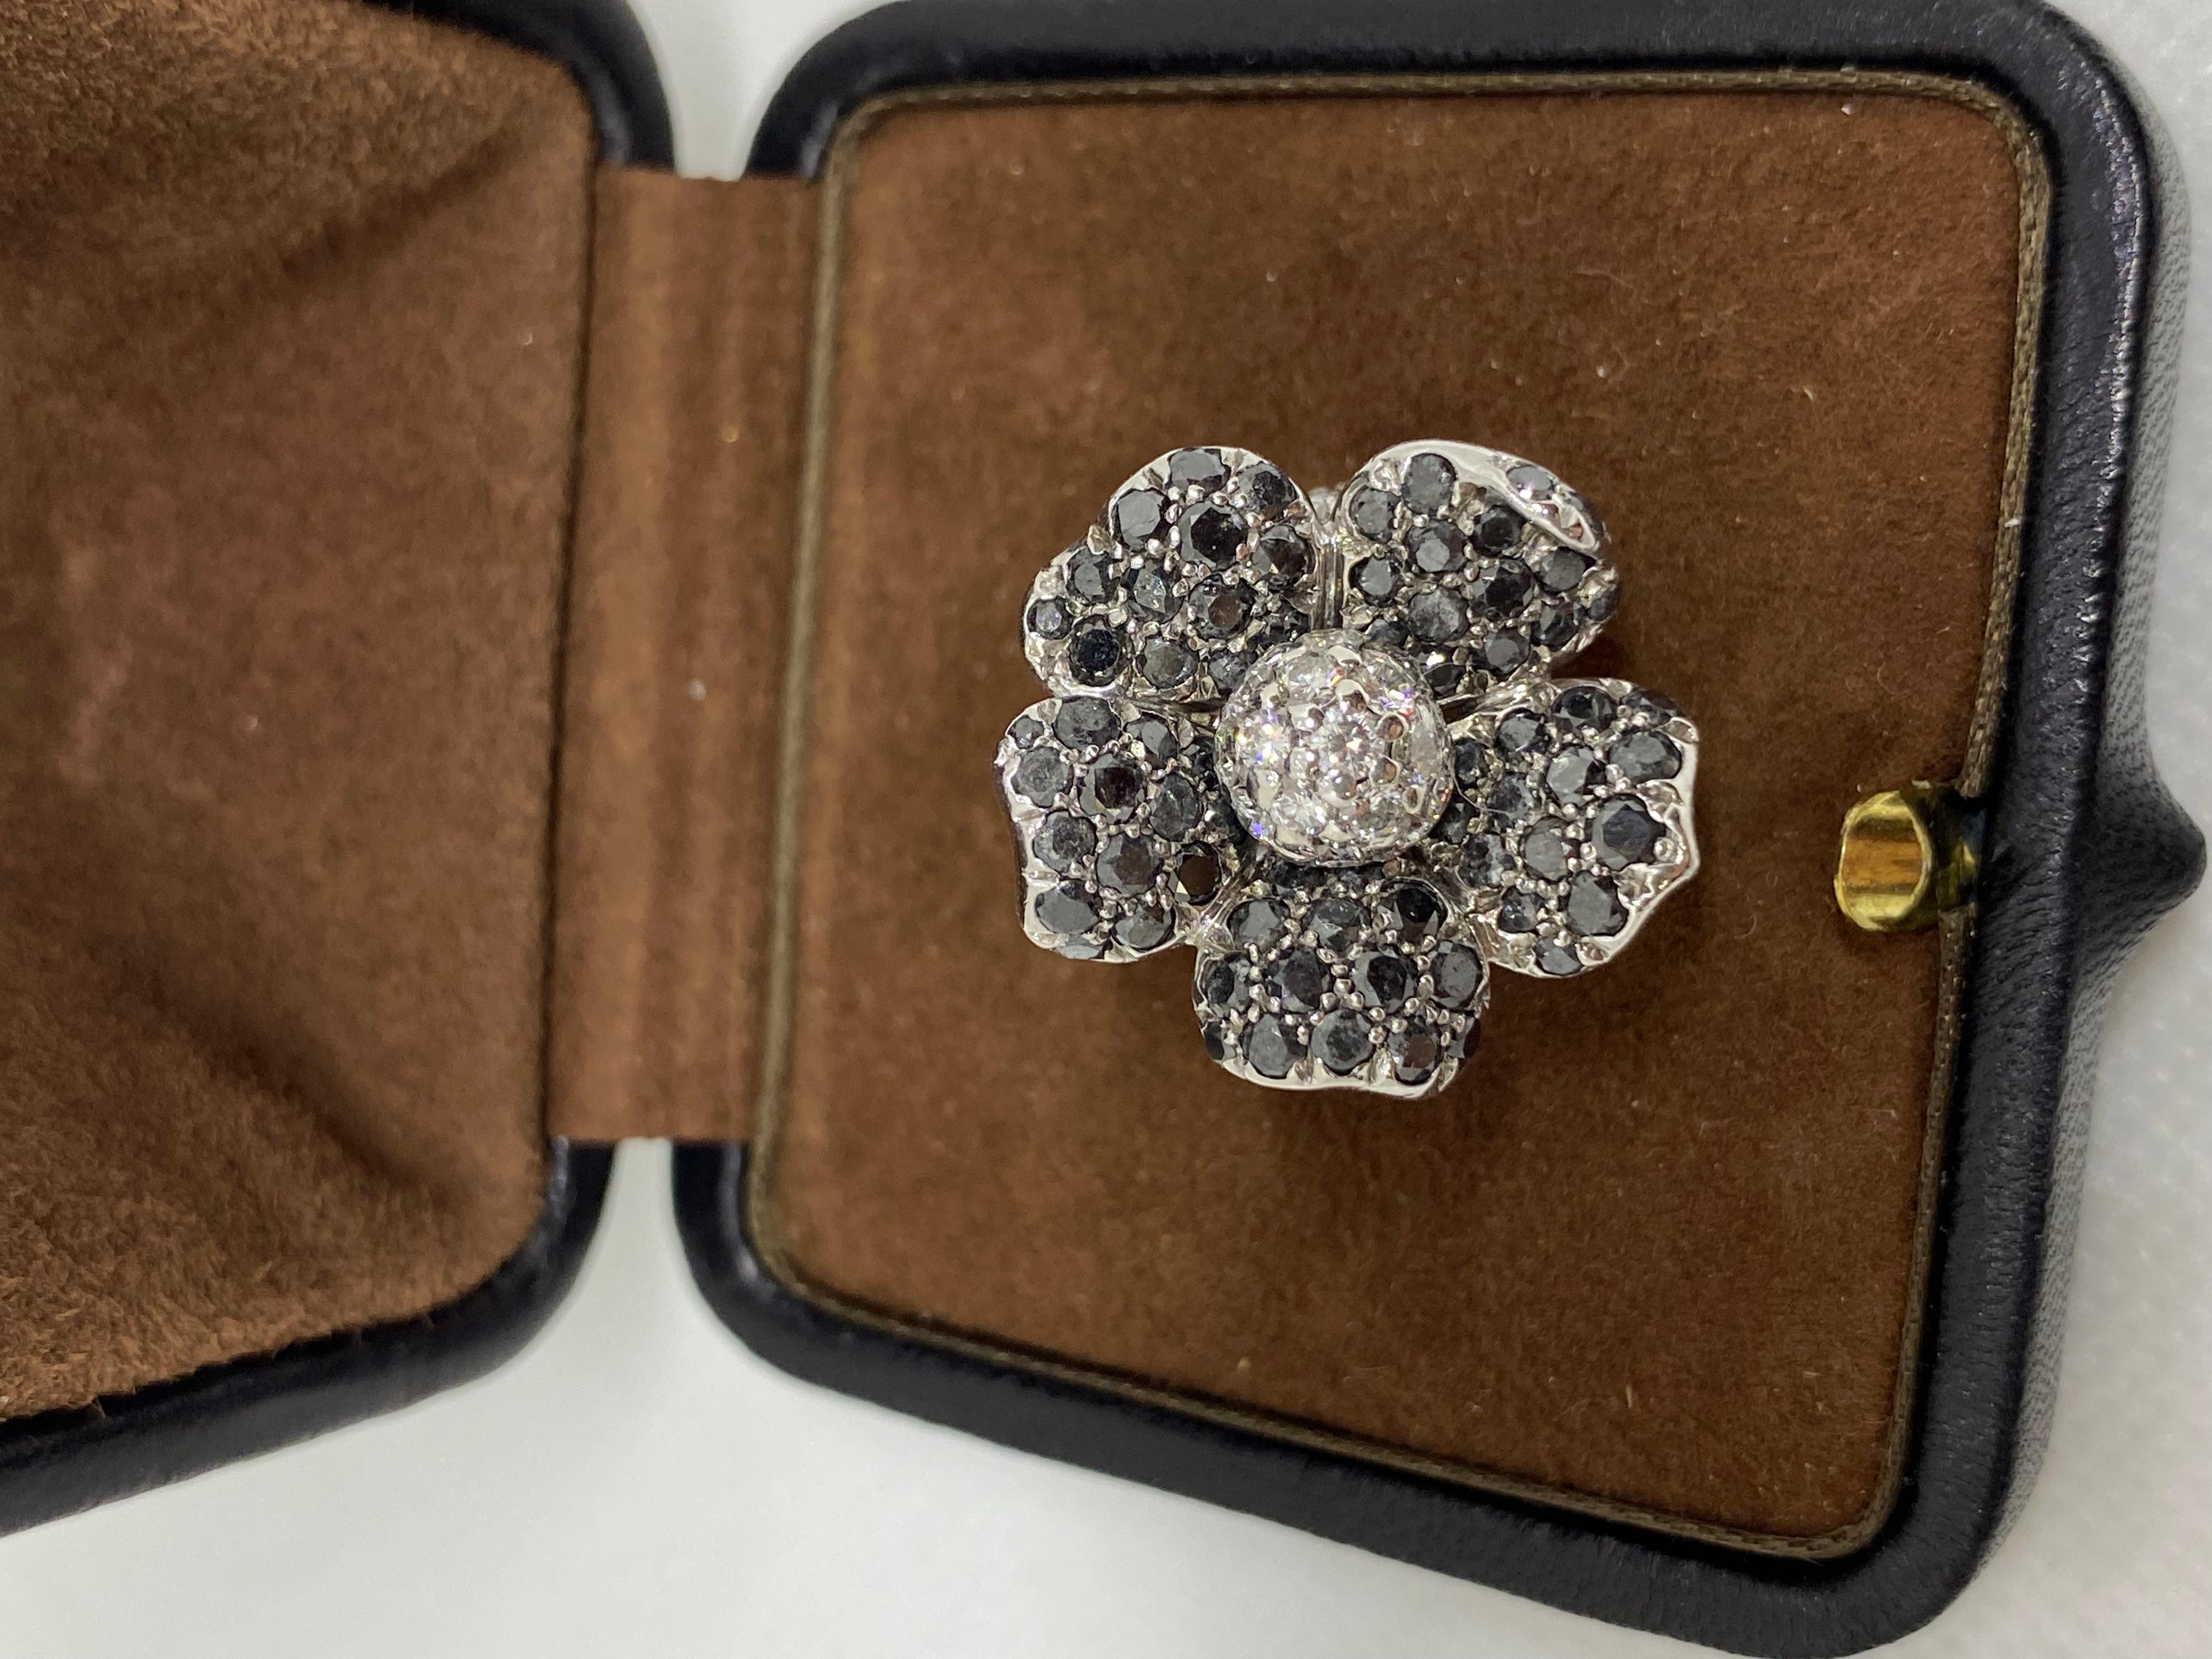 Gorgeous de GRISOGONO ring made in 18K White Gold with Black & White Diamonds. Ring size is US 5.5mm with a diameter of 16.38 mm. The flower on top is 21 x 23 mm. White diamonds: 1.75 cts. Black diamonds: 3.30 cts. All black diamonds are natural